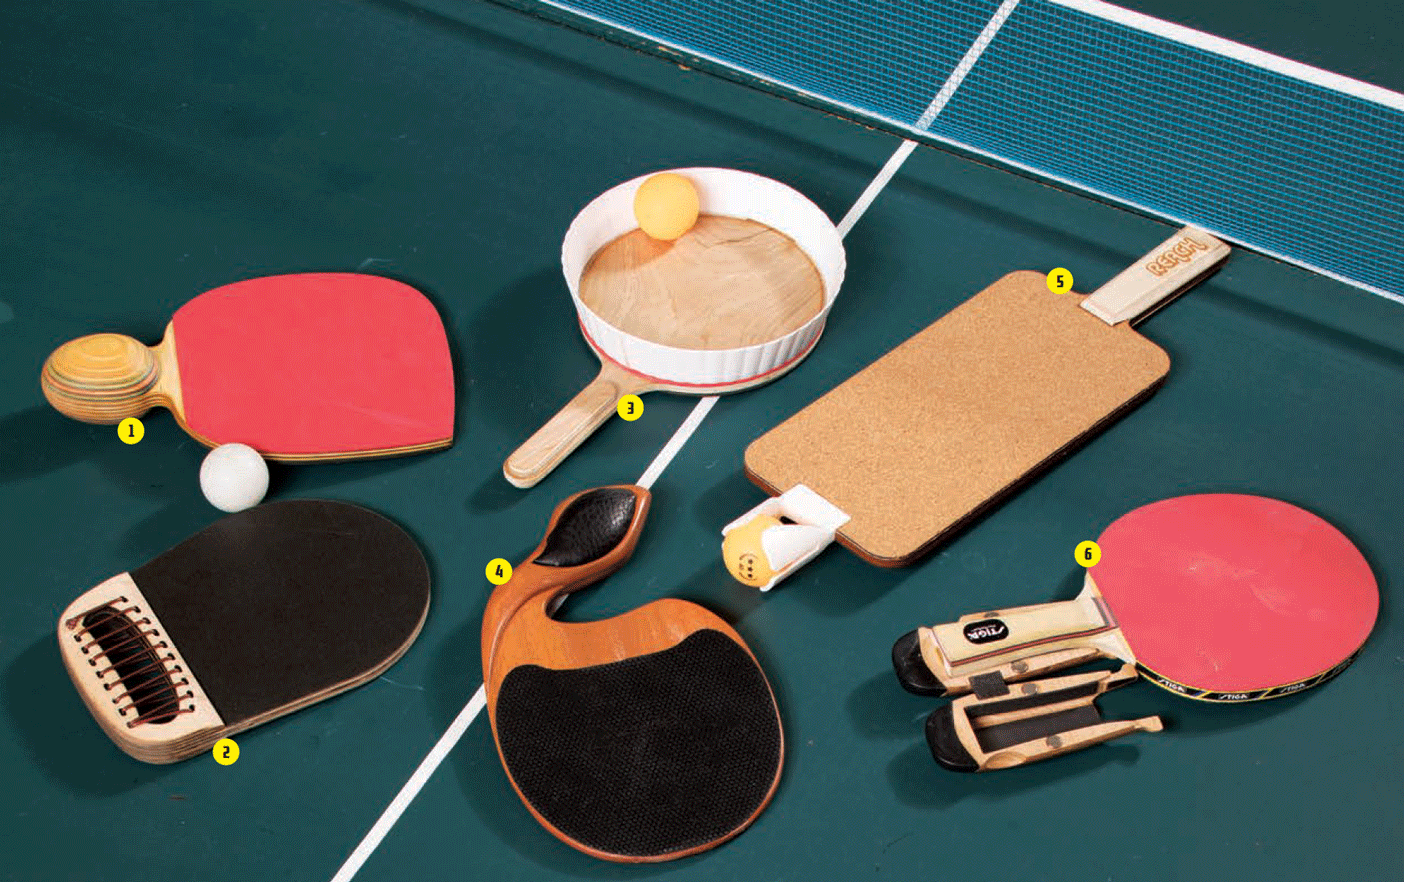 A photograph of six unique ping pong paddles lying on a ping pong table.